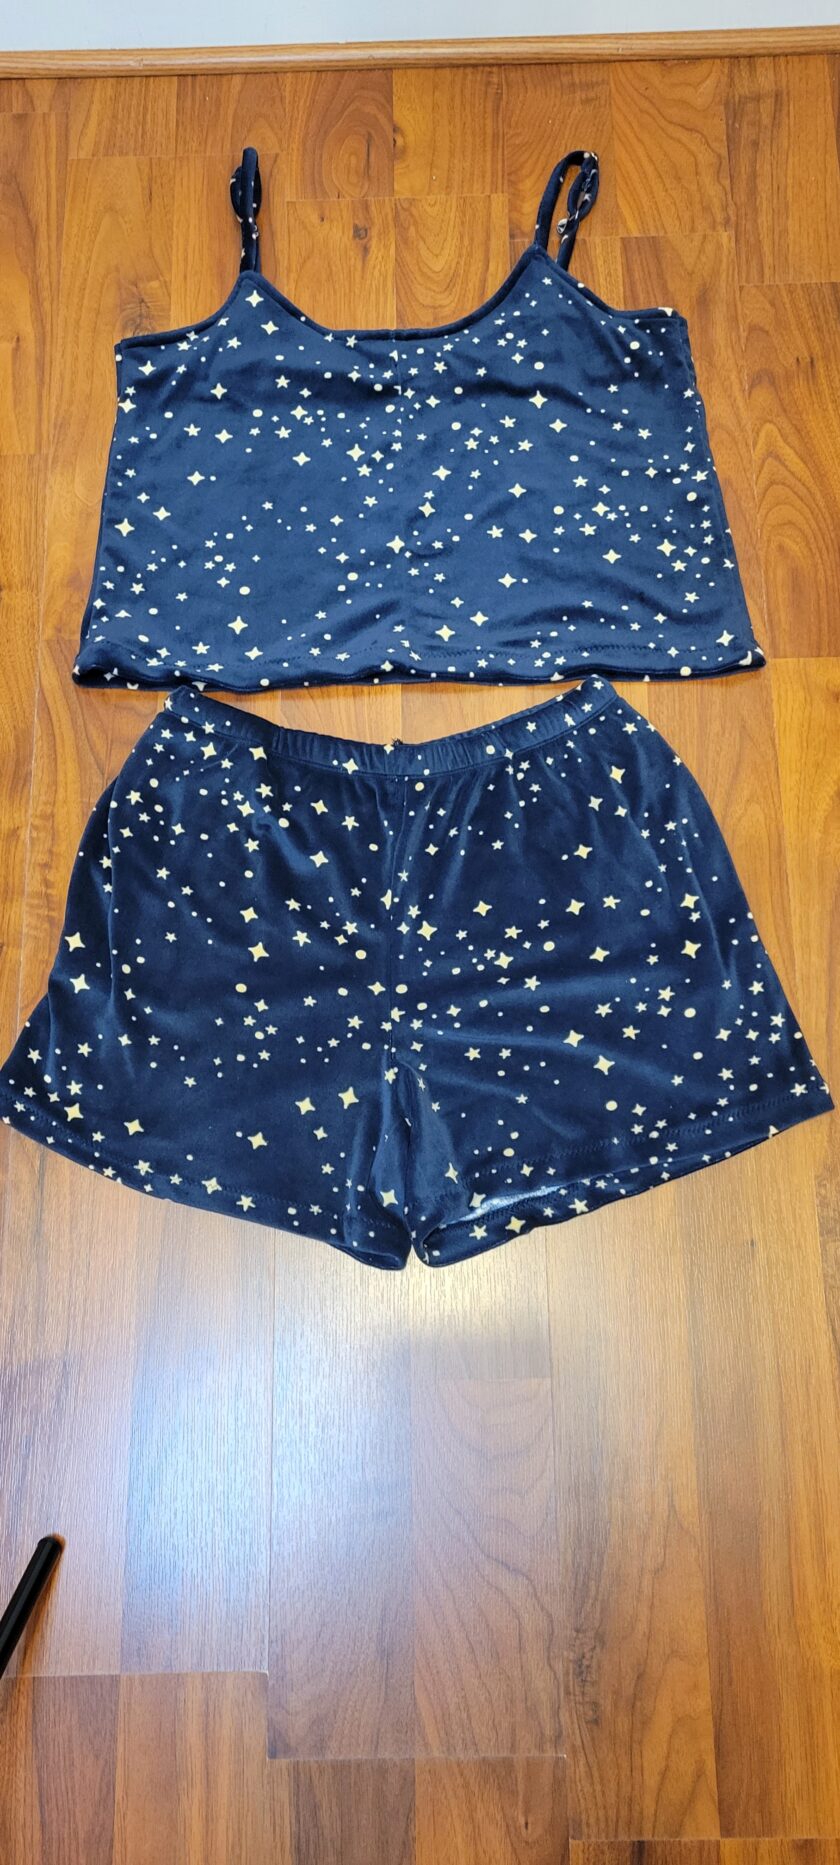 A pair of blue shorts with white stars on it.